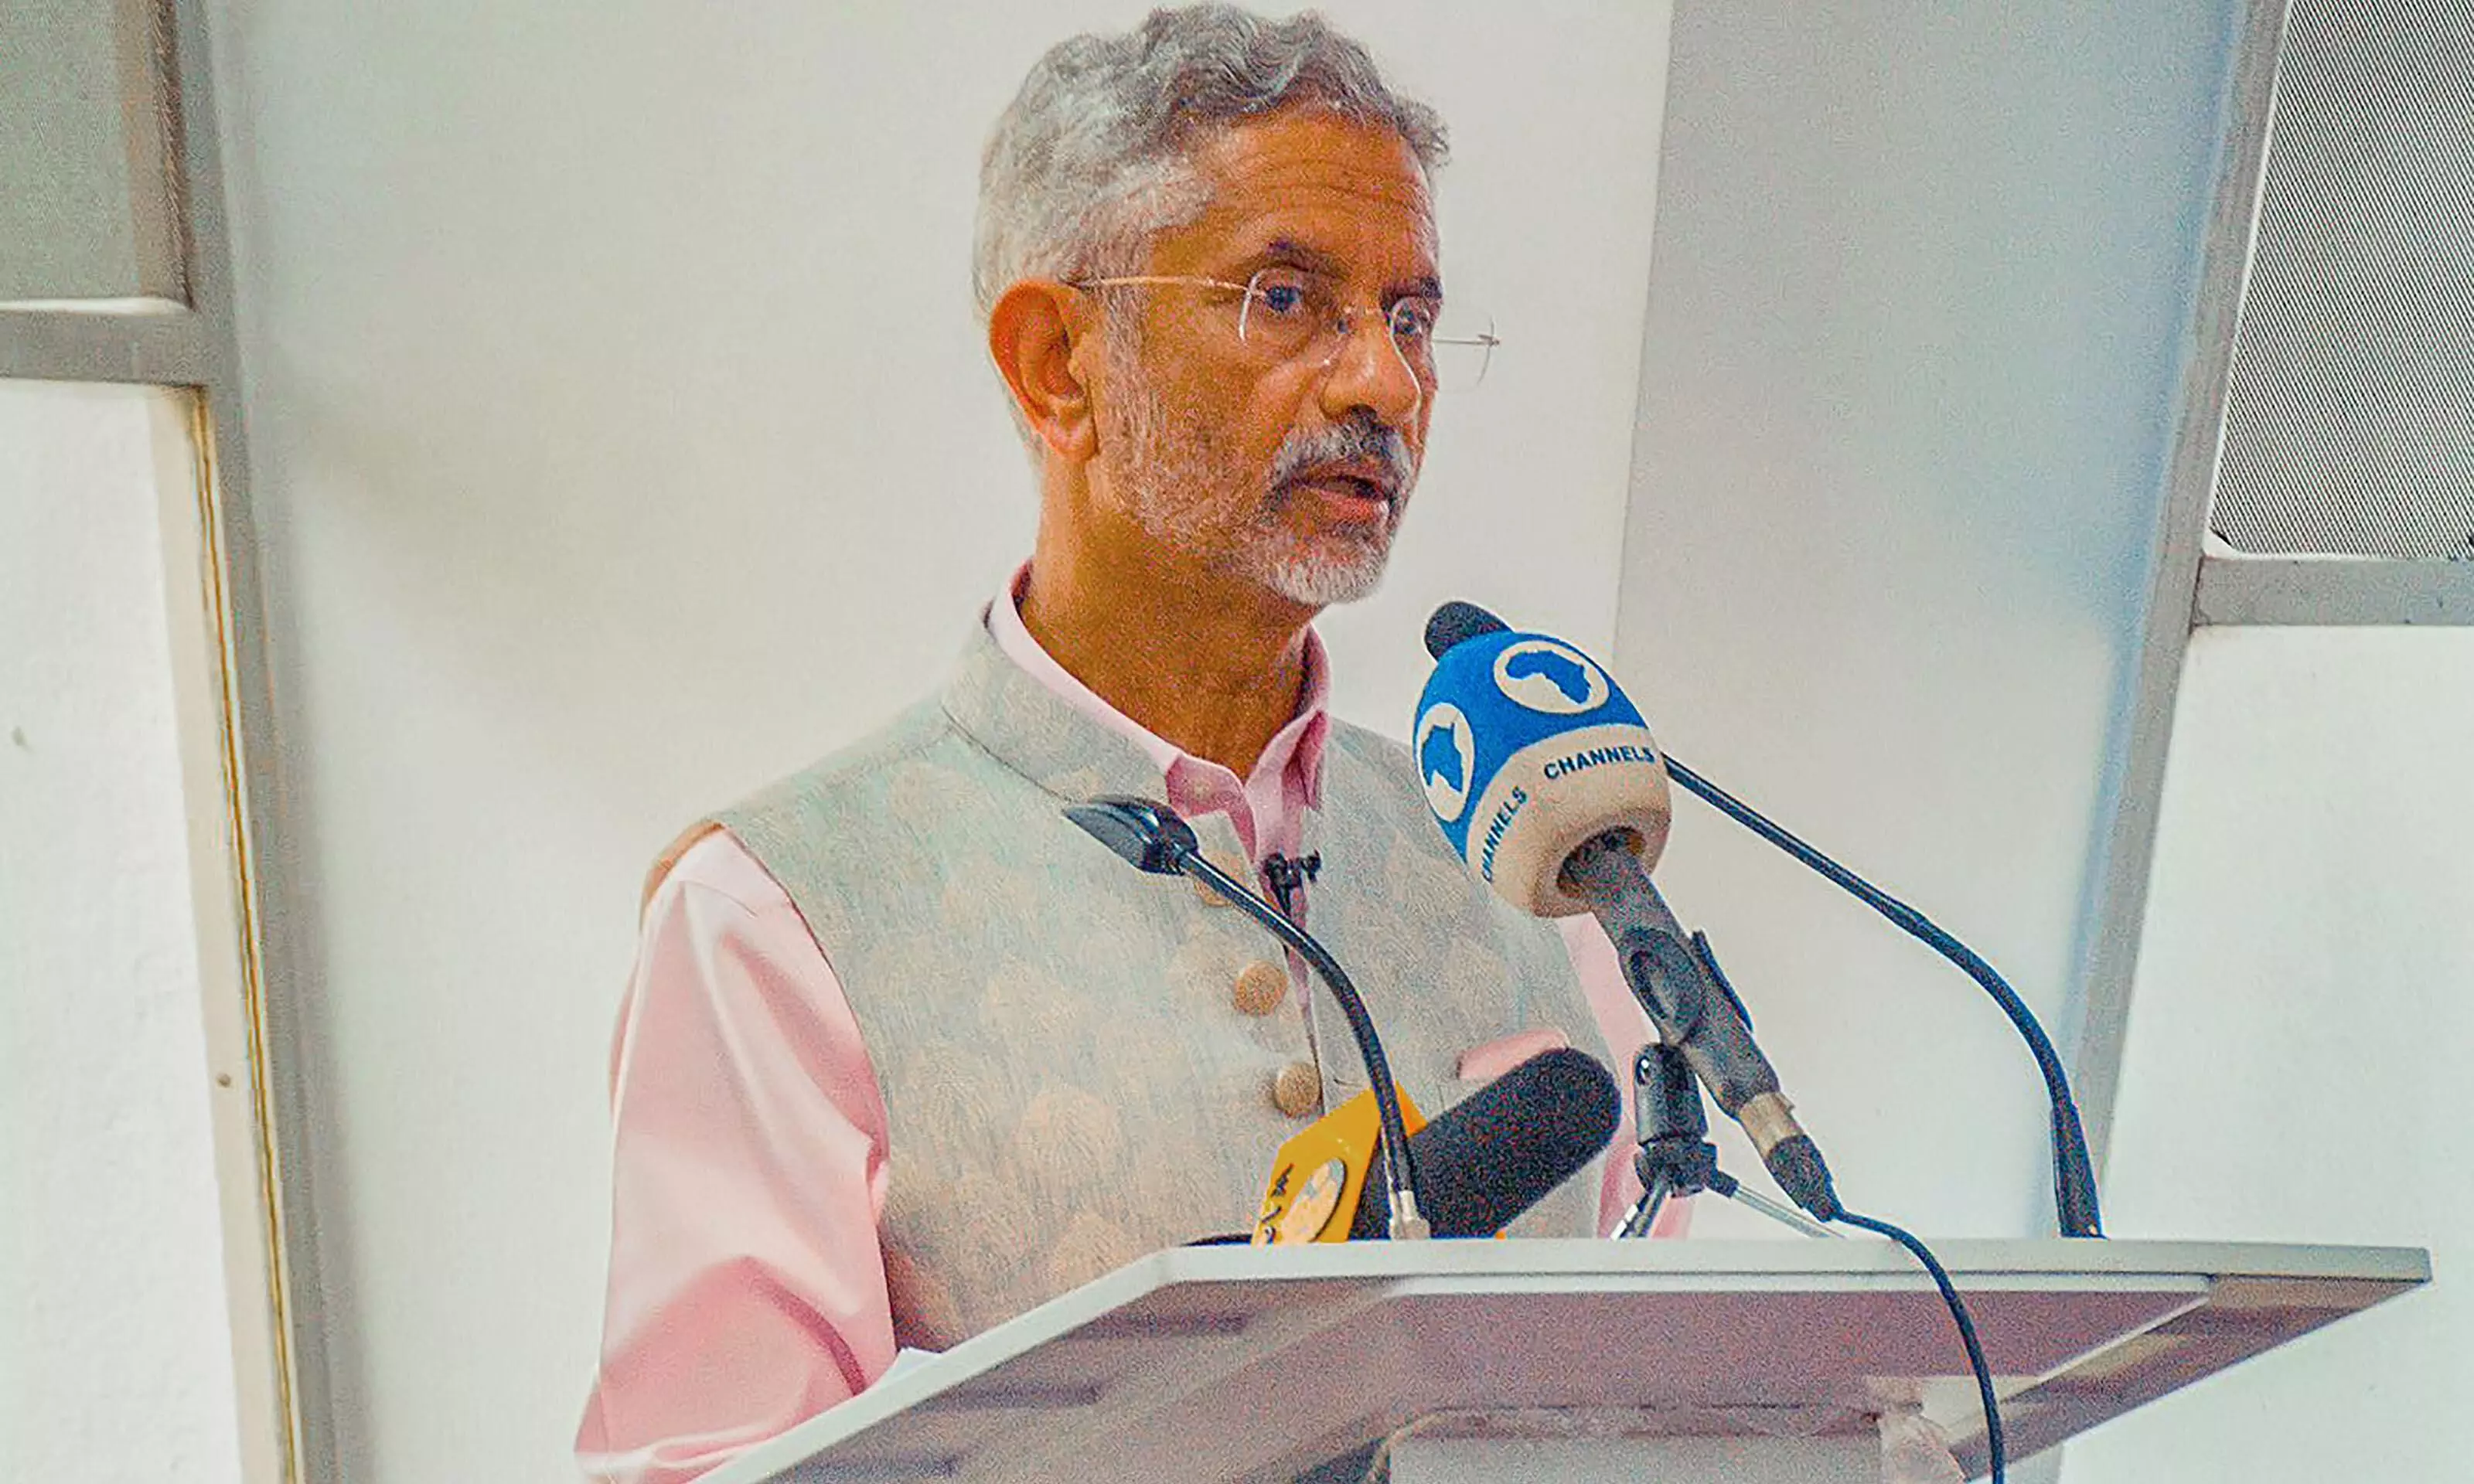 India and Russia have taken extra care to look after each others interests: EAM Jaishankar